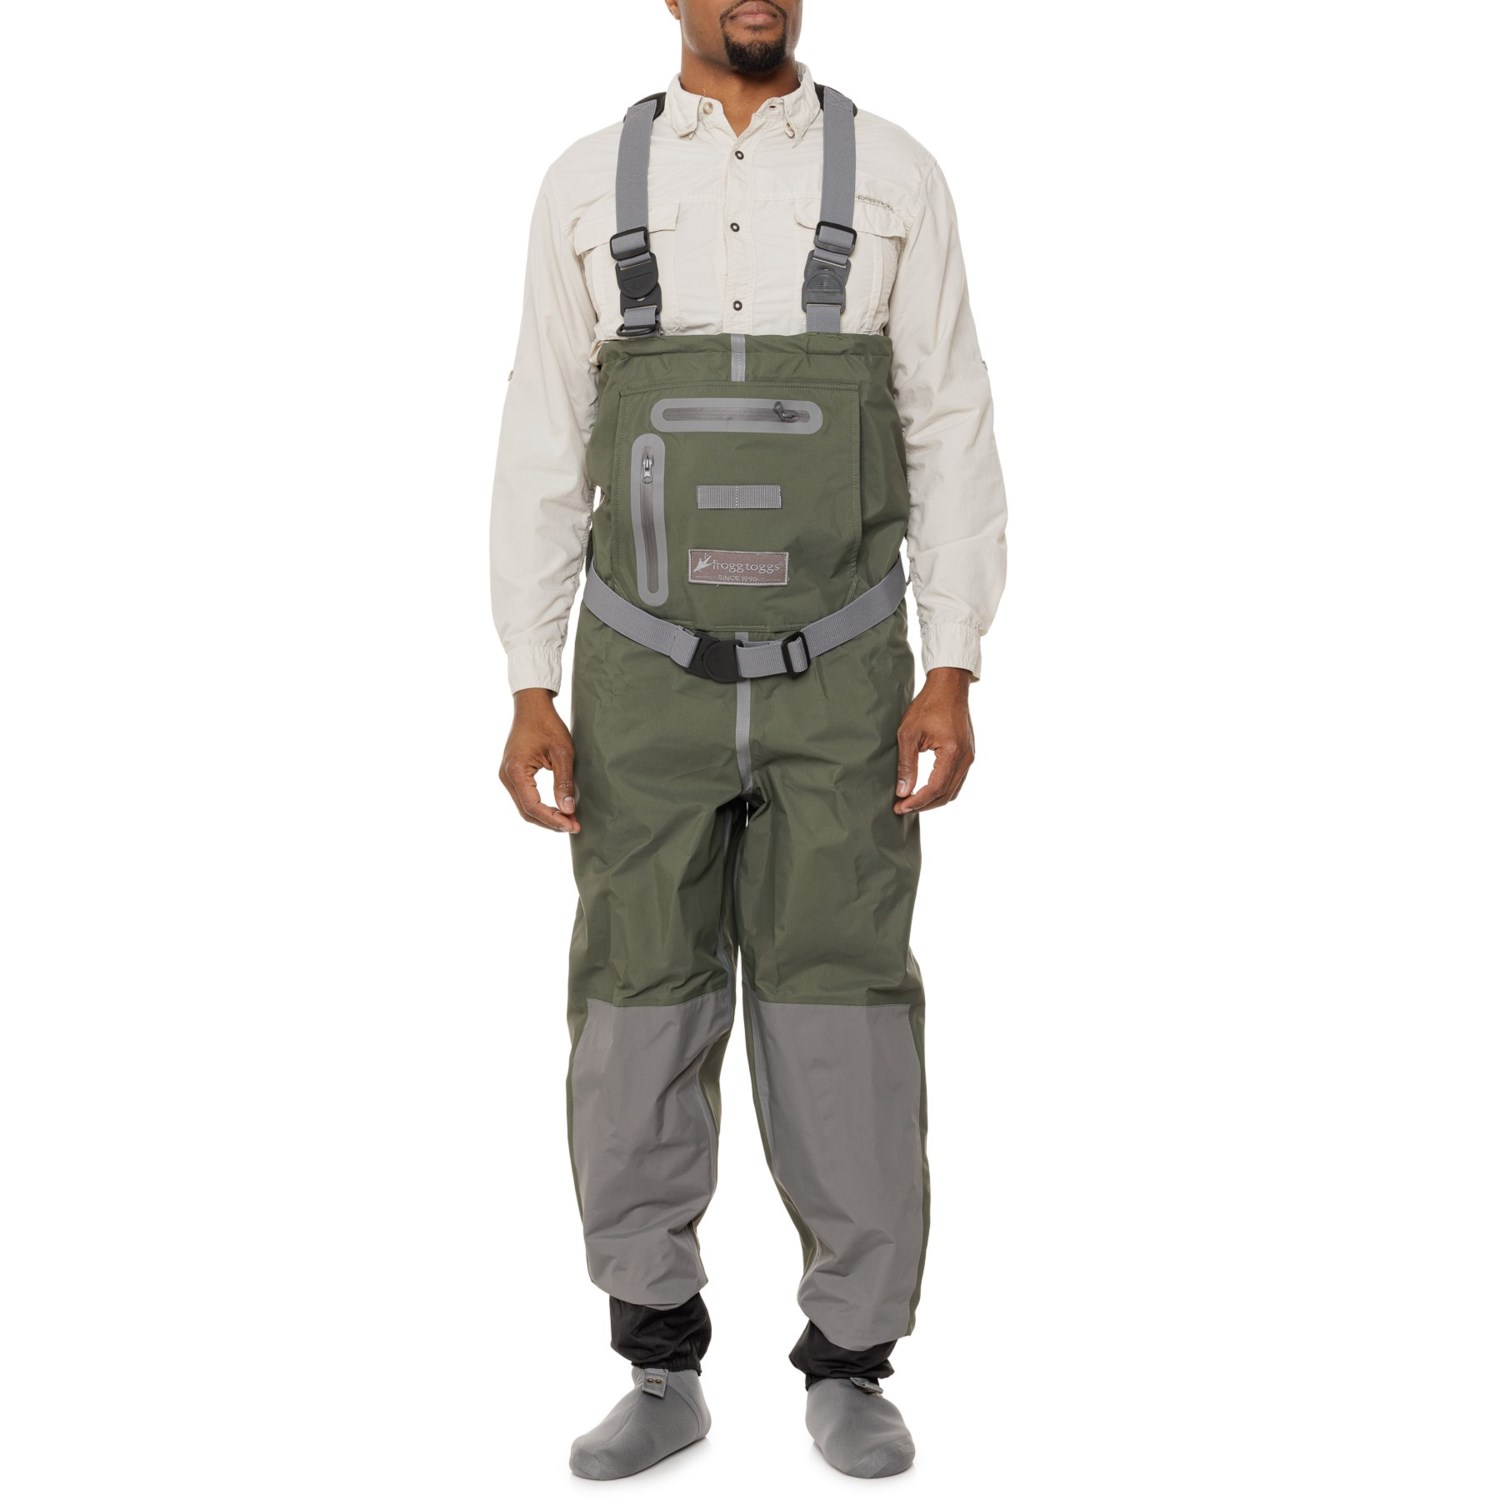 Frogg Toggs Pilot River Guide Stockingfoot Chest Waders - Save 46%